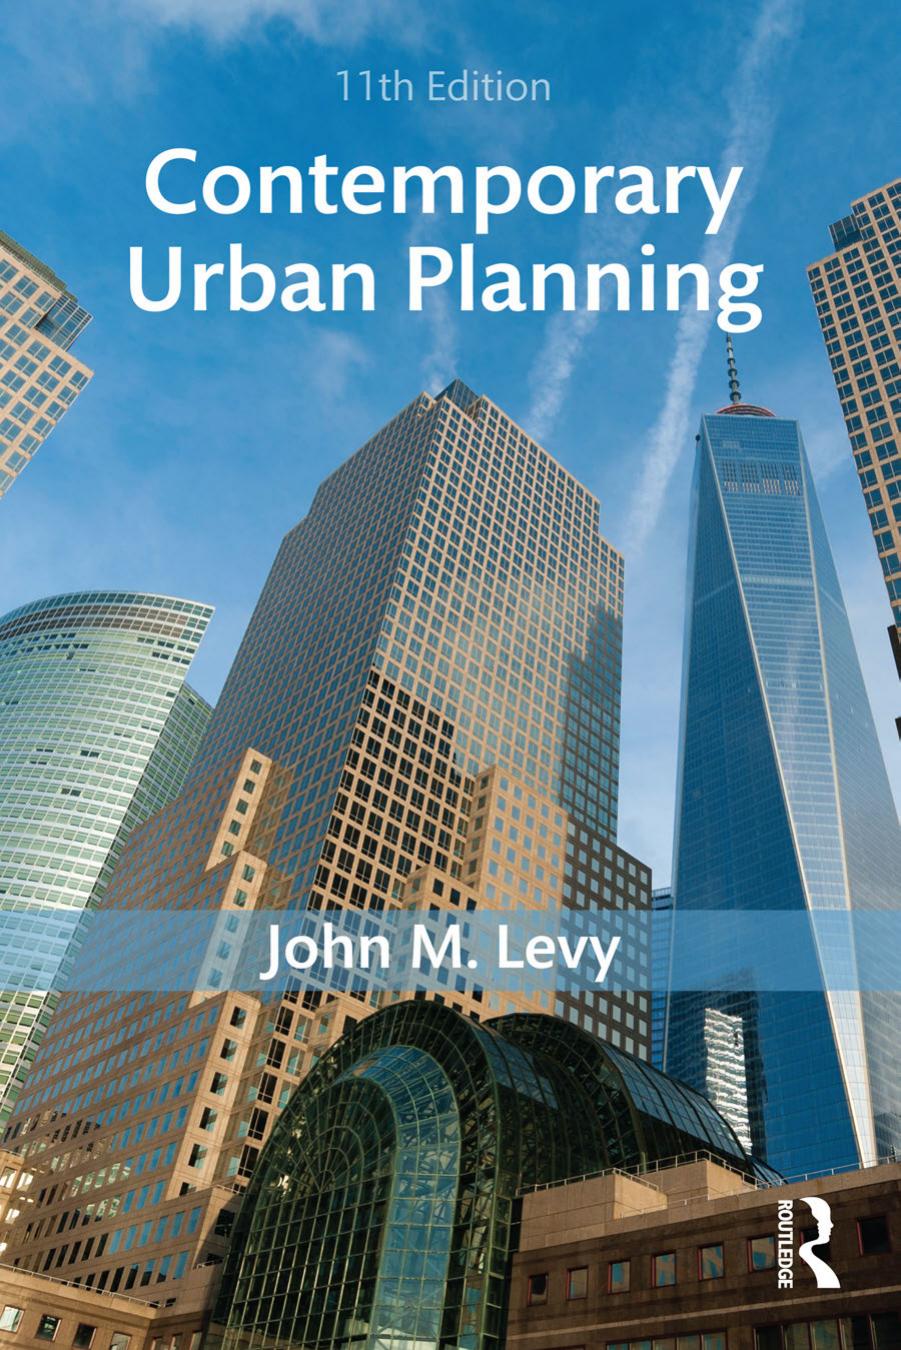 Contemporary Urban Planning by John M. Levy